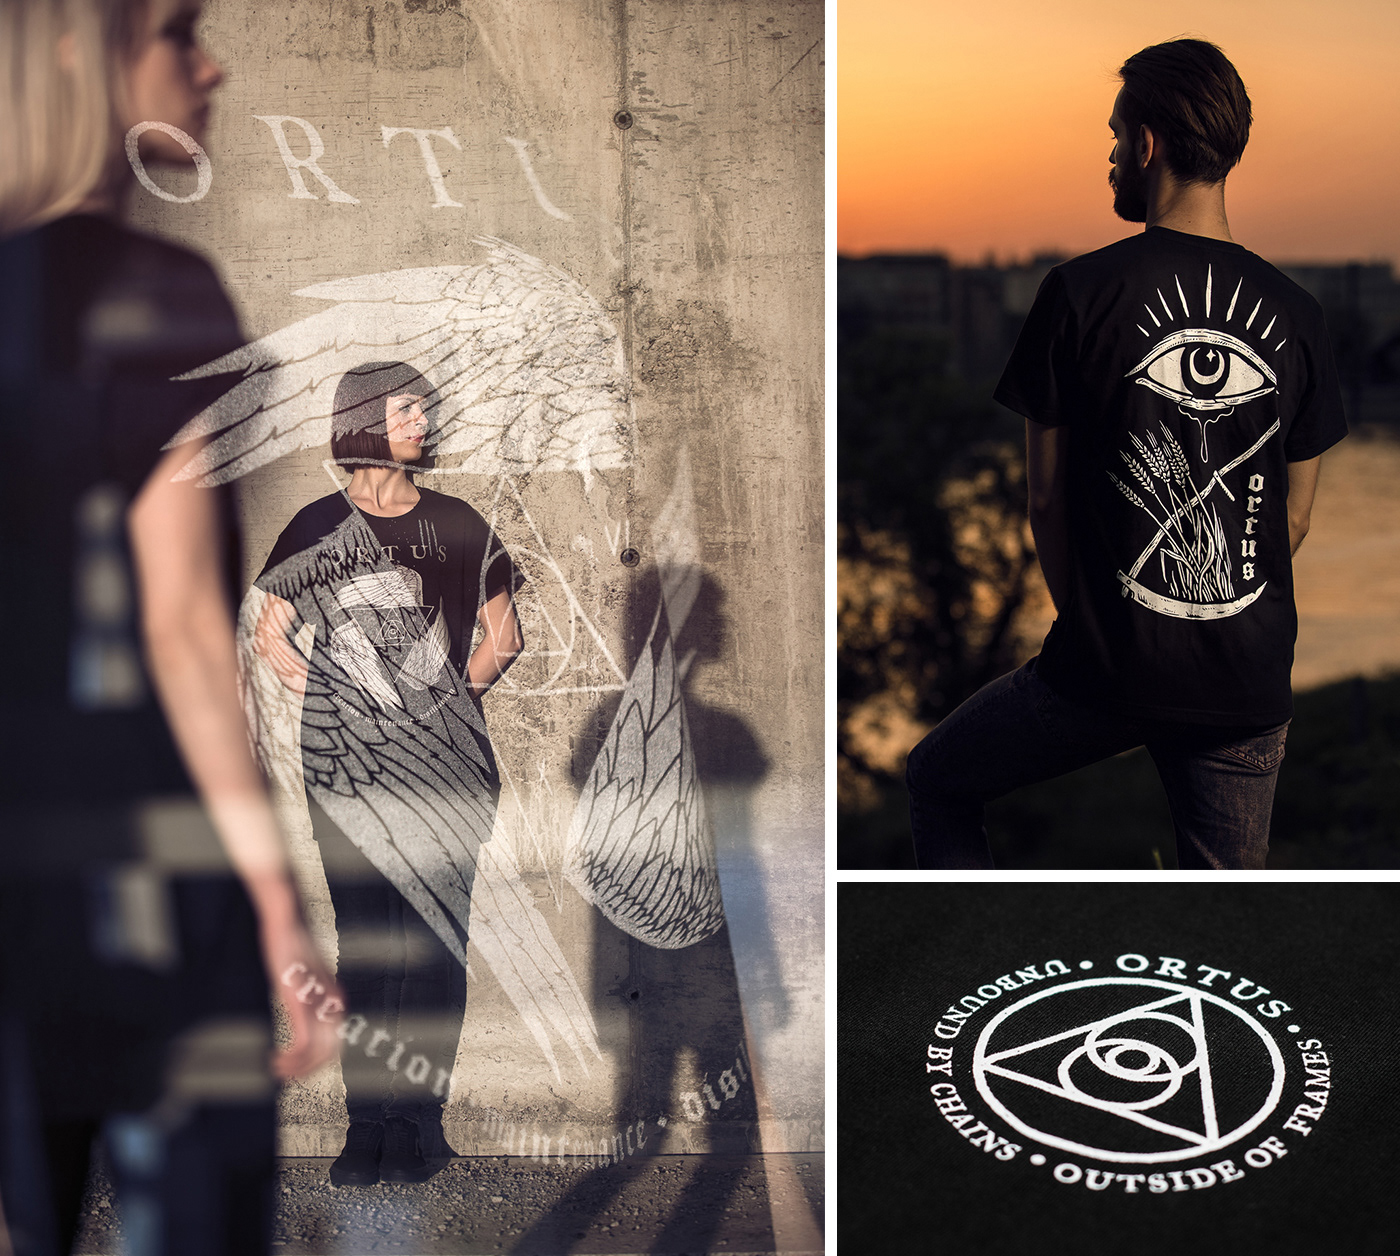 ortus apparel TS Clothing streetwear esotheric occult punk Independent freedom